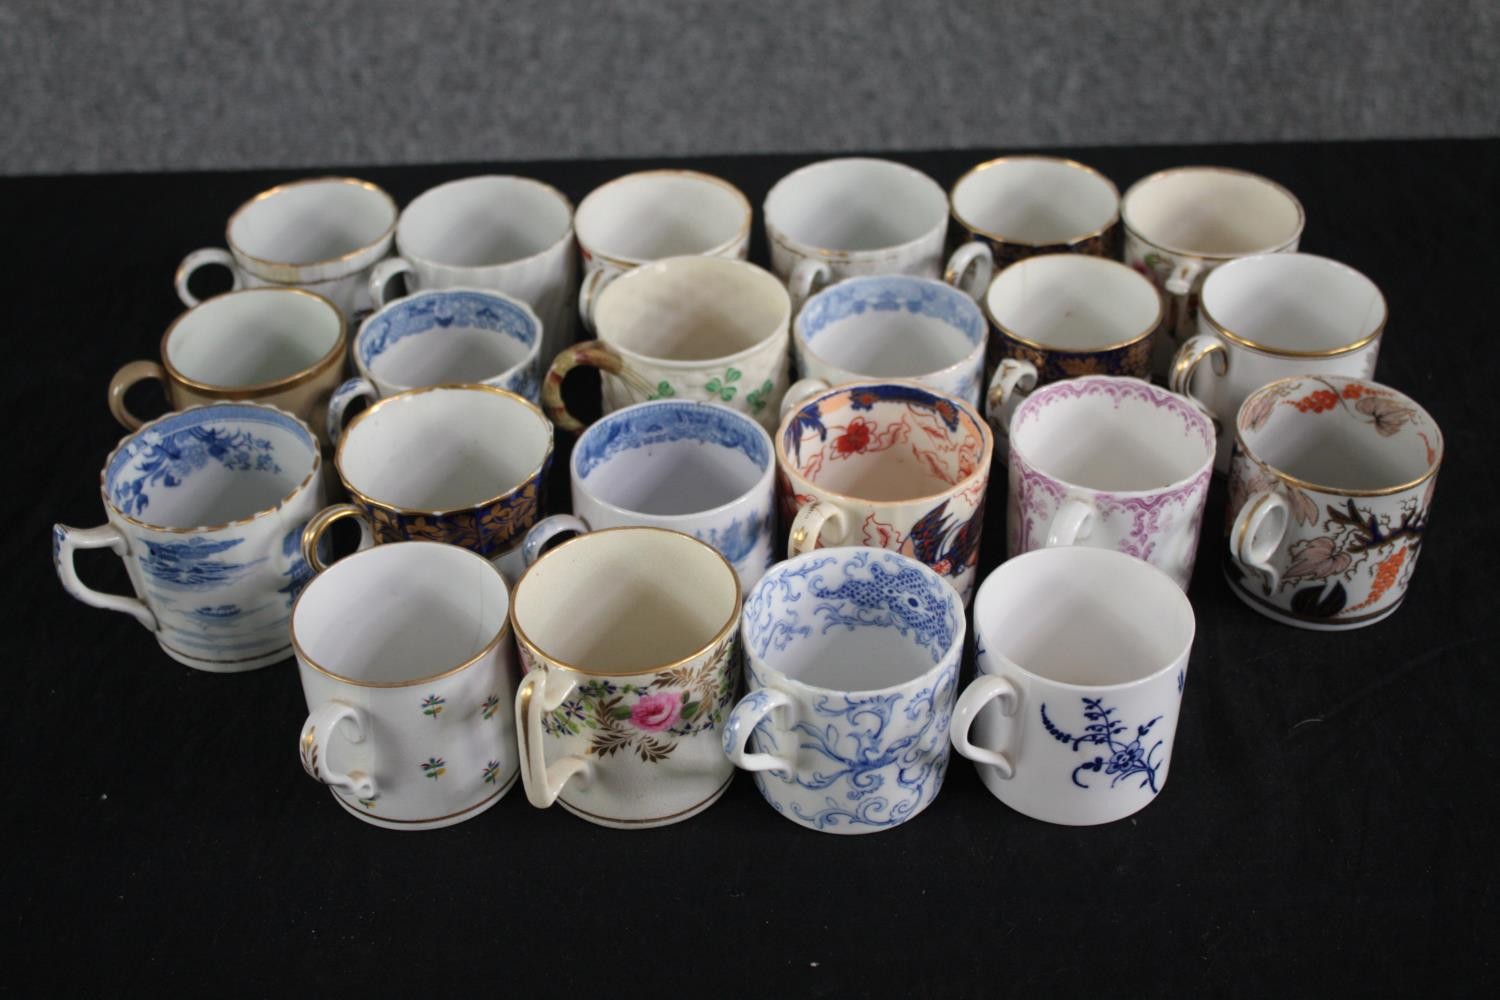 An assortment of 19th century porcelain coffee cans with hand painted design, including one made